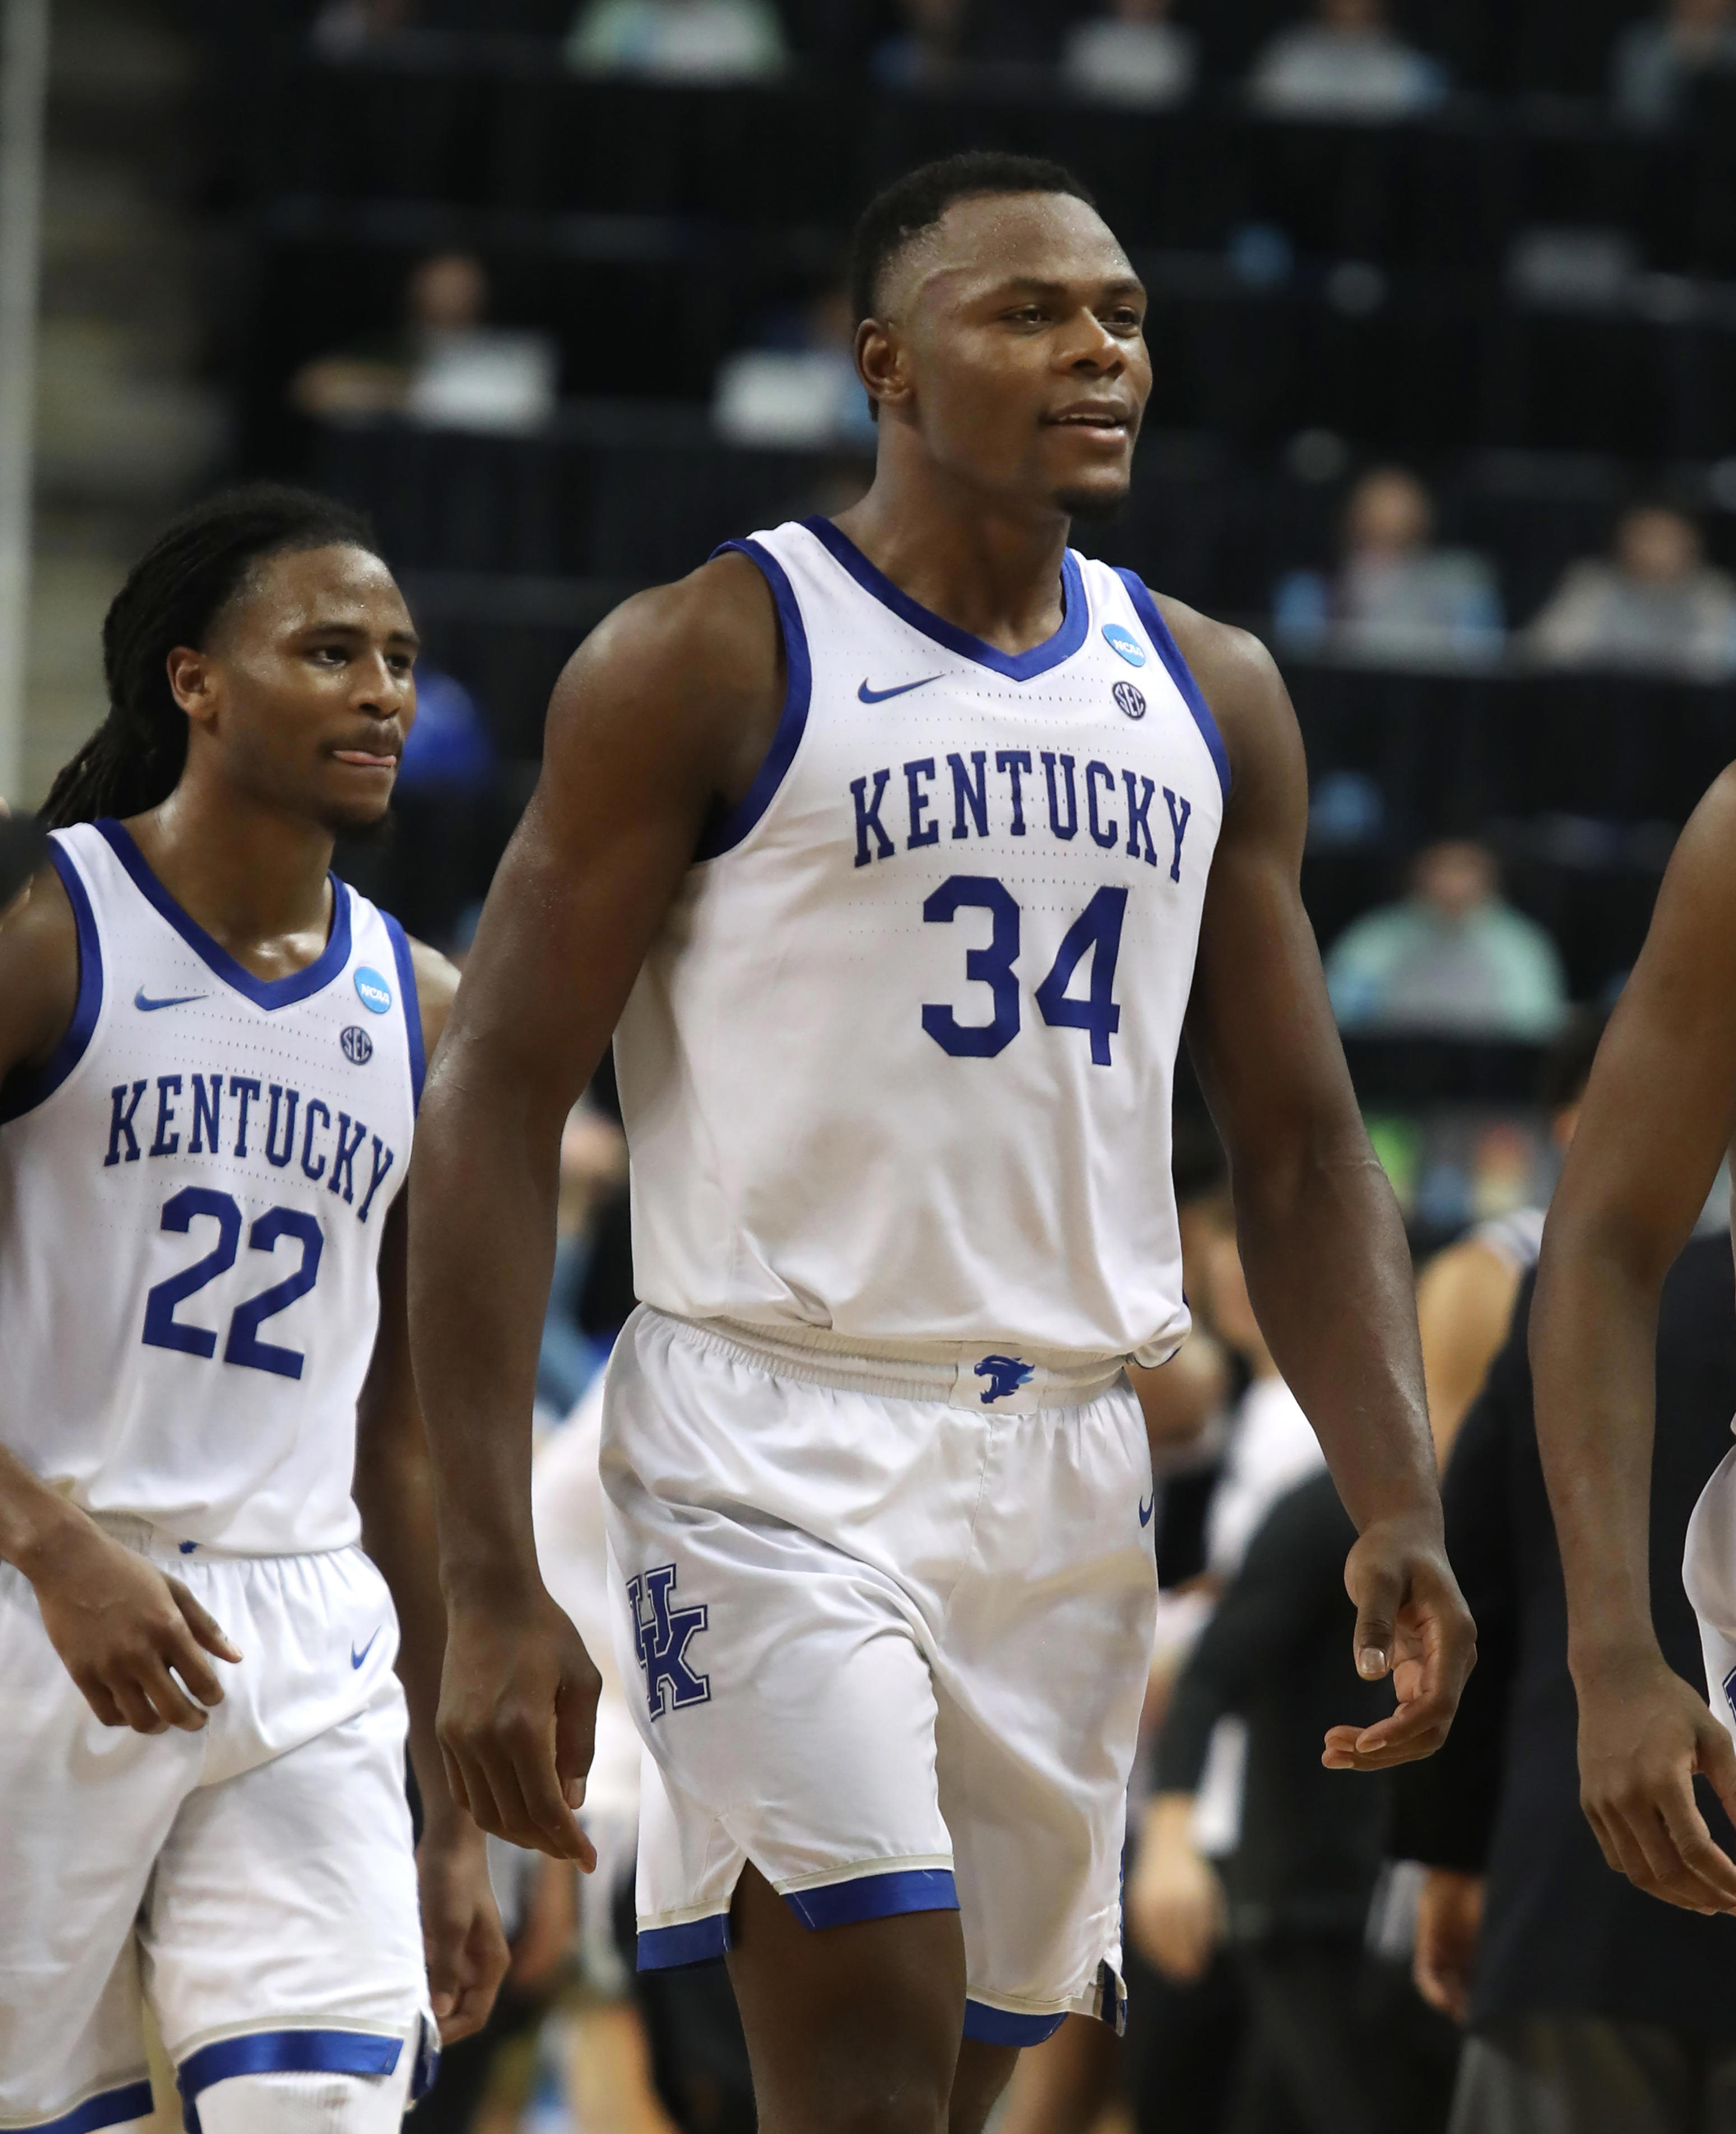 Kentucky's Oscar Tshiebwe signs with the Indiana Pacers. See other